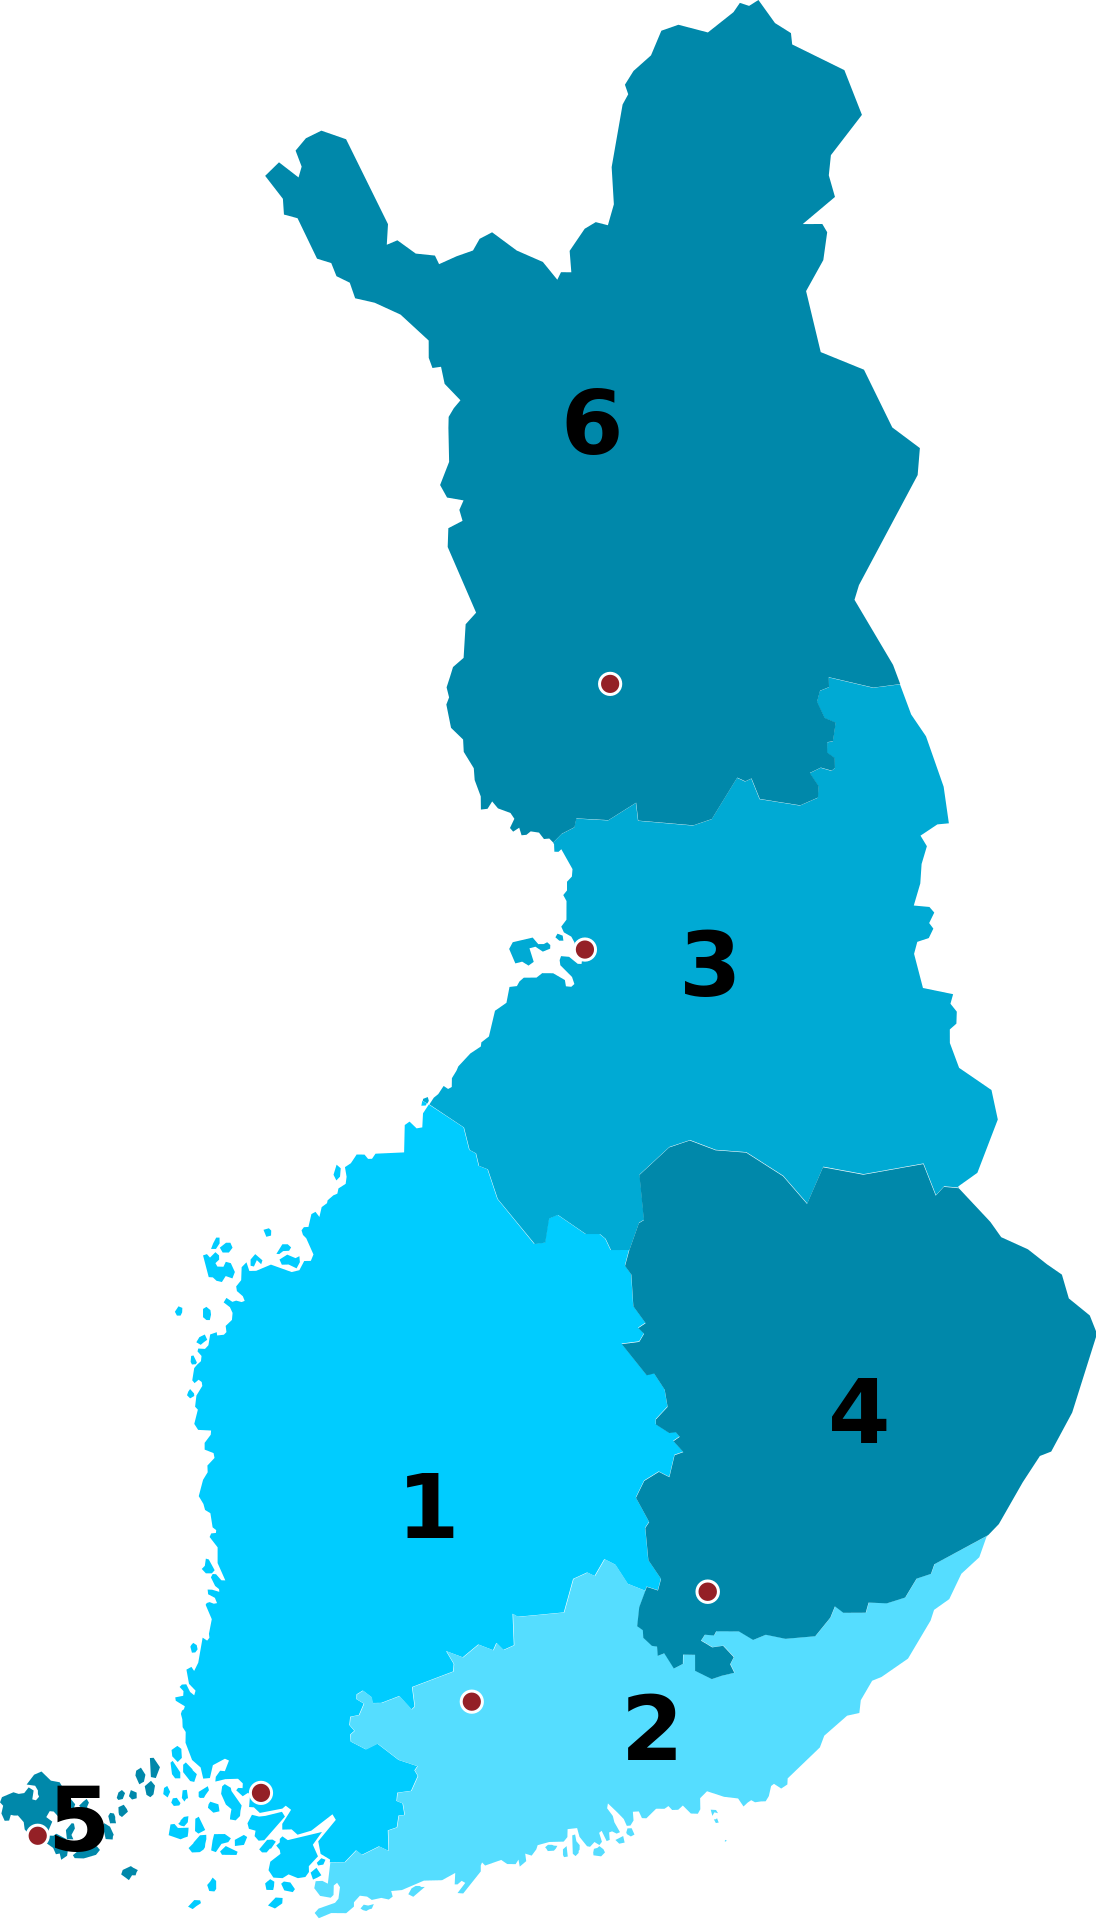 1096px-Provinces_of_Finland_1997_-_2009.svg.png